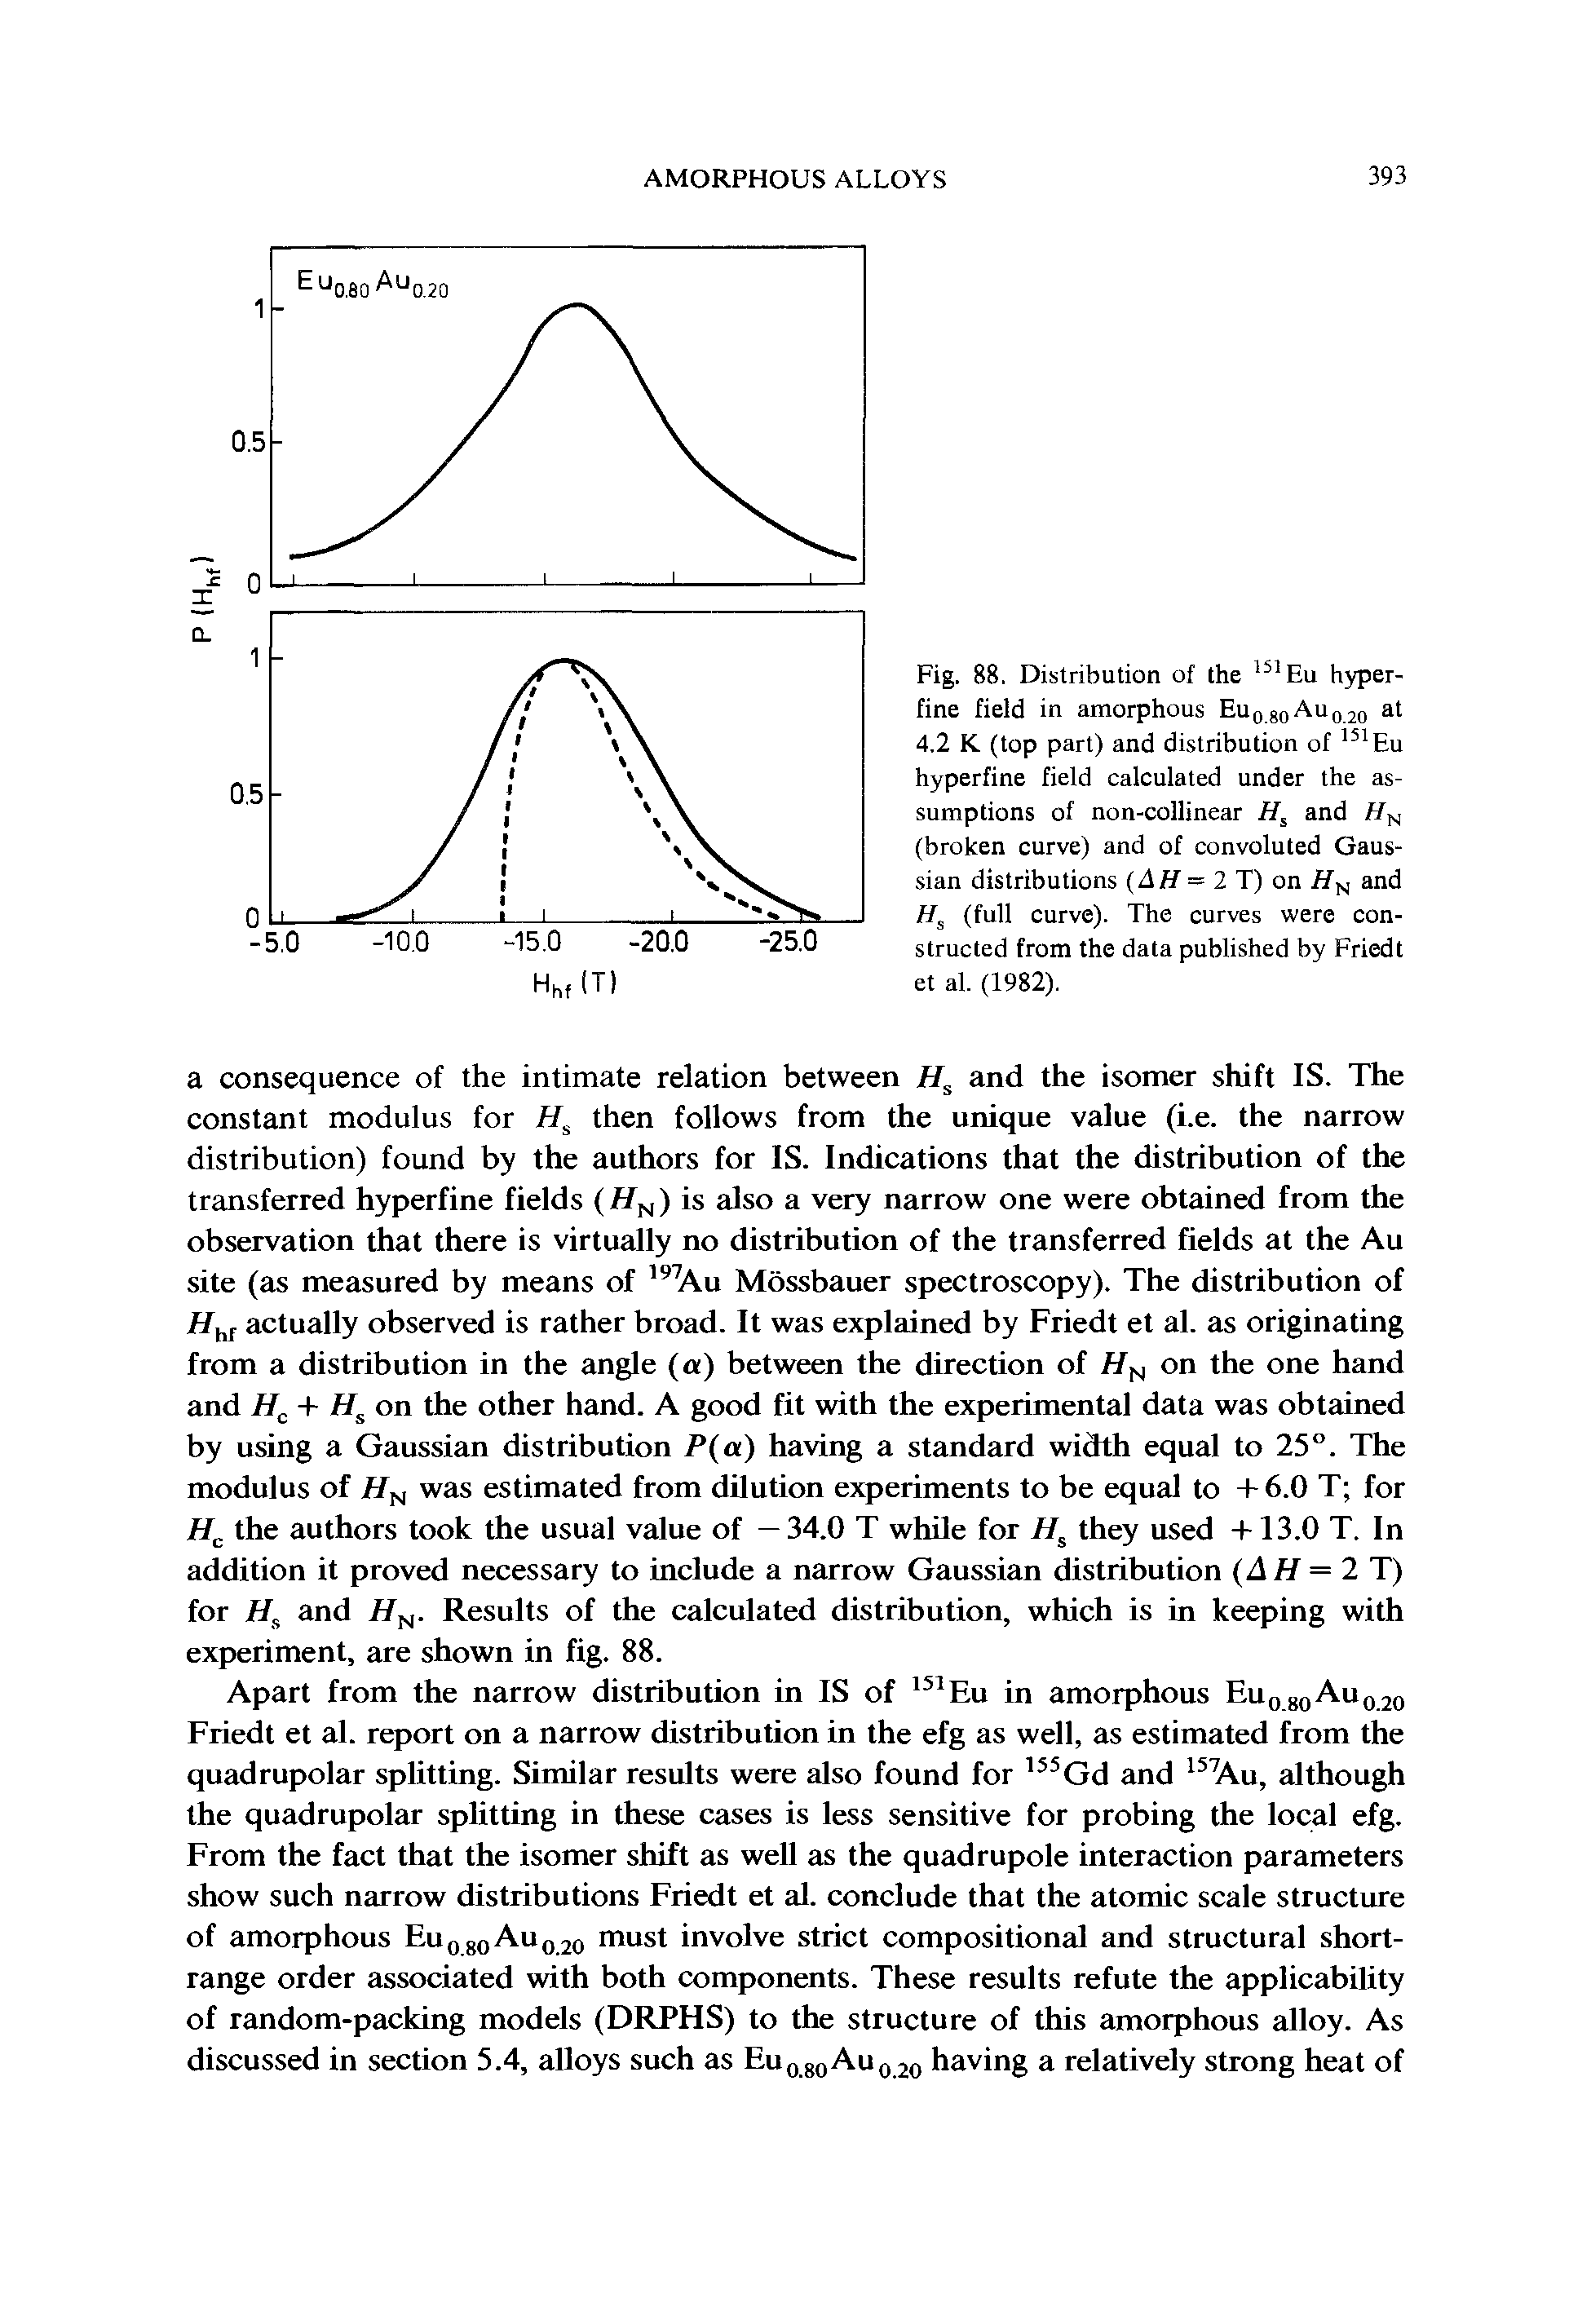 Fig. 88. Distribution of the Eu hyper-fine field in amorphous EuqjqAuqjo at 4.2 K (top part) and distribution of Eu hyperfine field calculated under the assumptions of non-collinear and (broken curve) and of convoluted Gaussian distributions (AH = 2 T) on H and (full curve). The curves were constructed from the data published by Friedt et al. (1982).